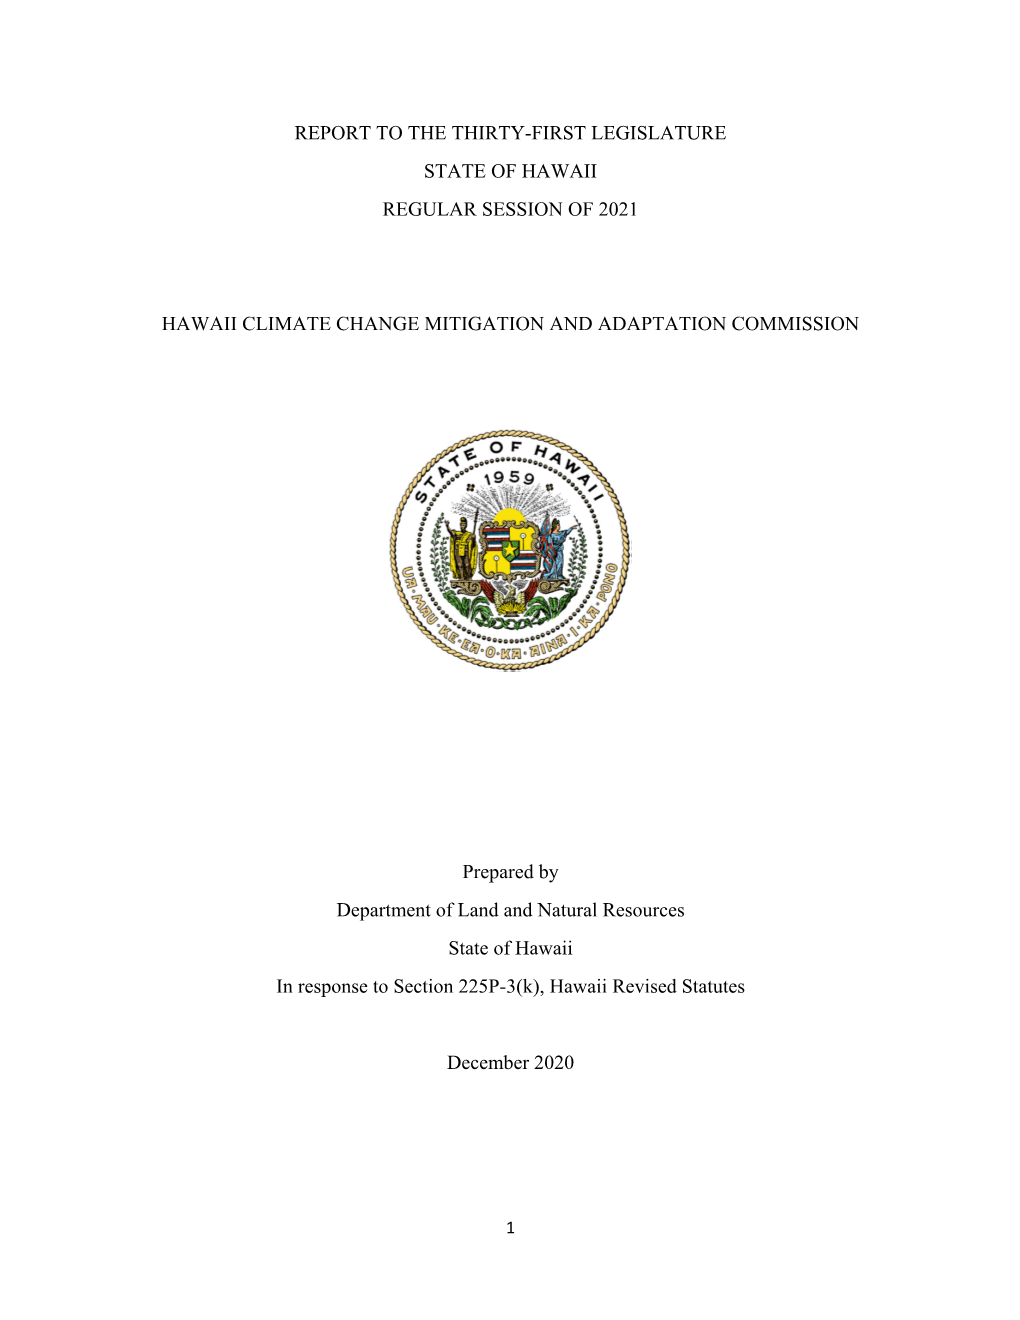 Hawaii Climate Change Mitigation and Adaptation Commission